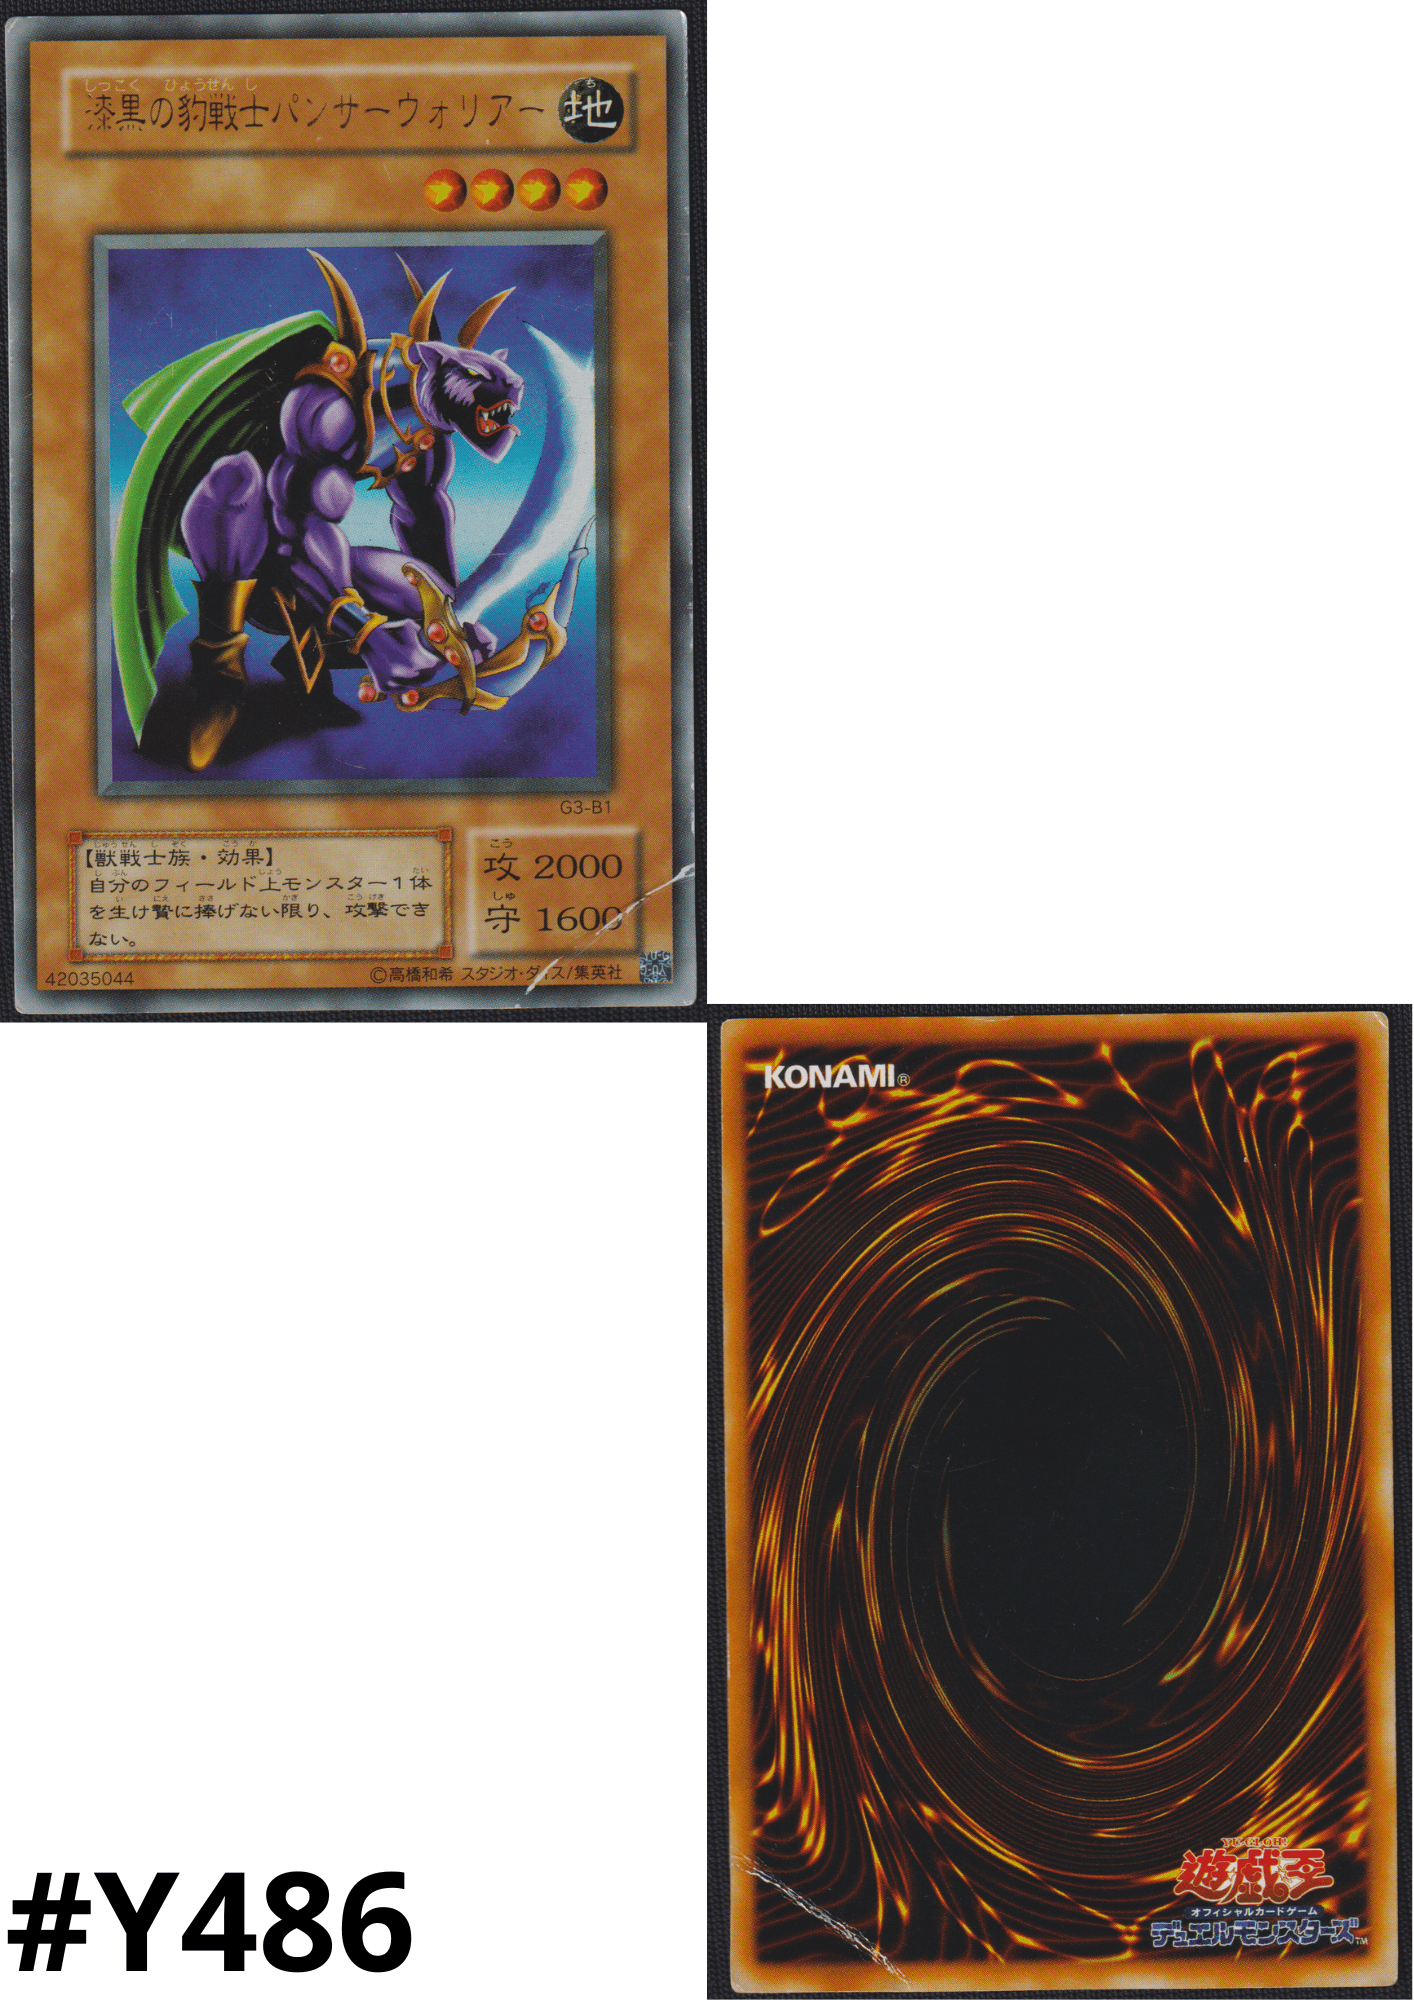 Panther Warrior G3-B1 | Yu-Gi-Oh! Duel Monsters III Promo